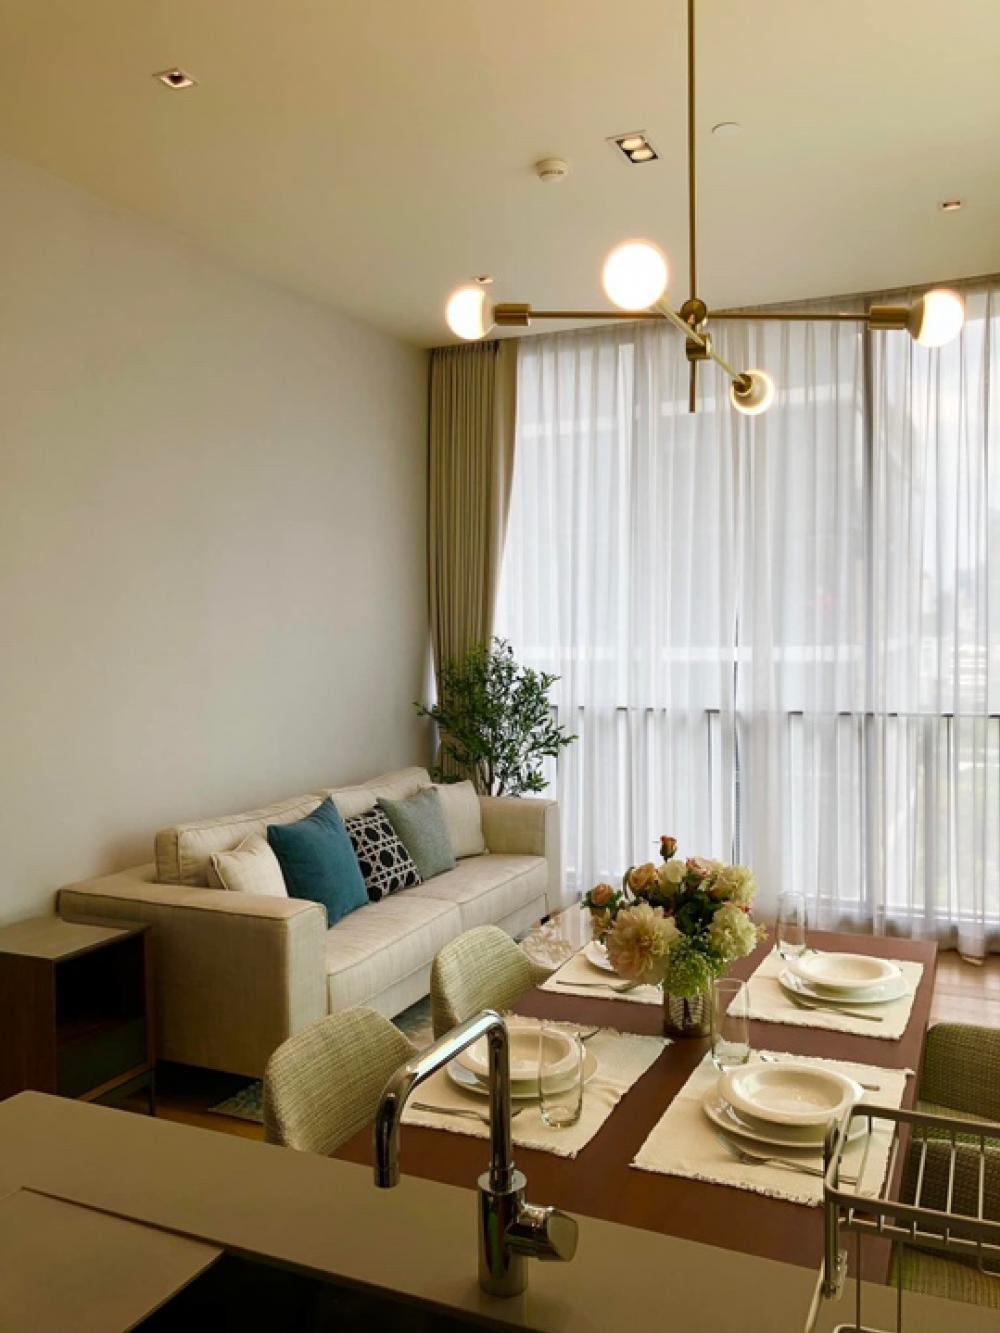 For RentCondoWitthayu, Chidlom, Langsuan, Ploenchit : For Rent 💜 28 Chidlom 💜 (Property Code #A23_6_0501_2) Beautiful room, beautiful view, ready to move in.